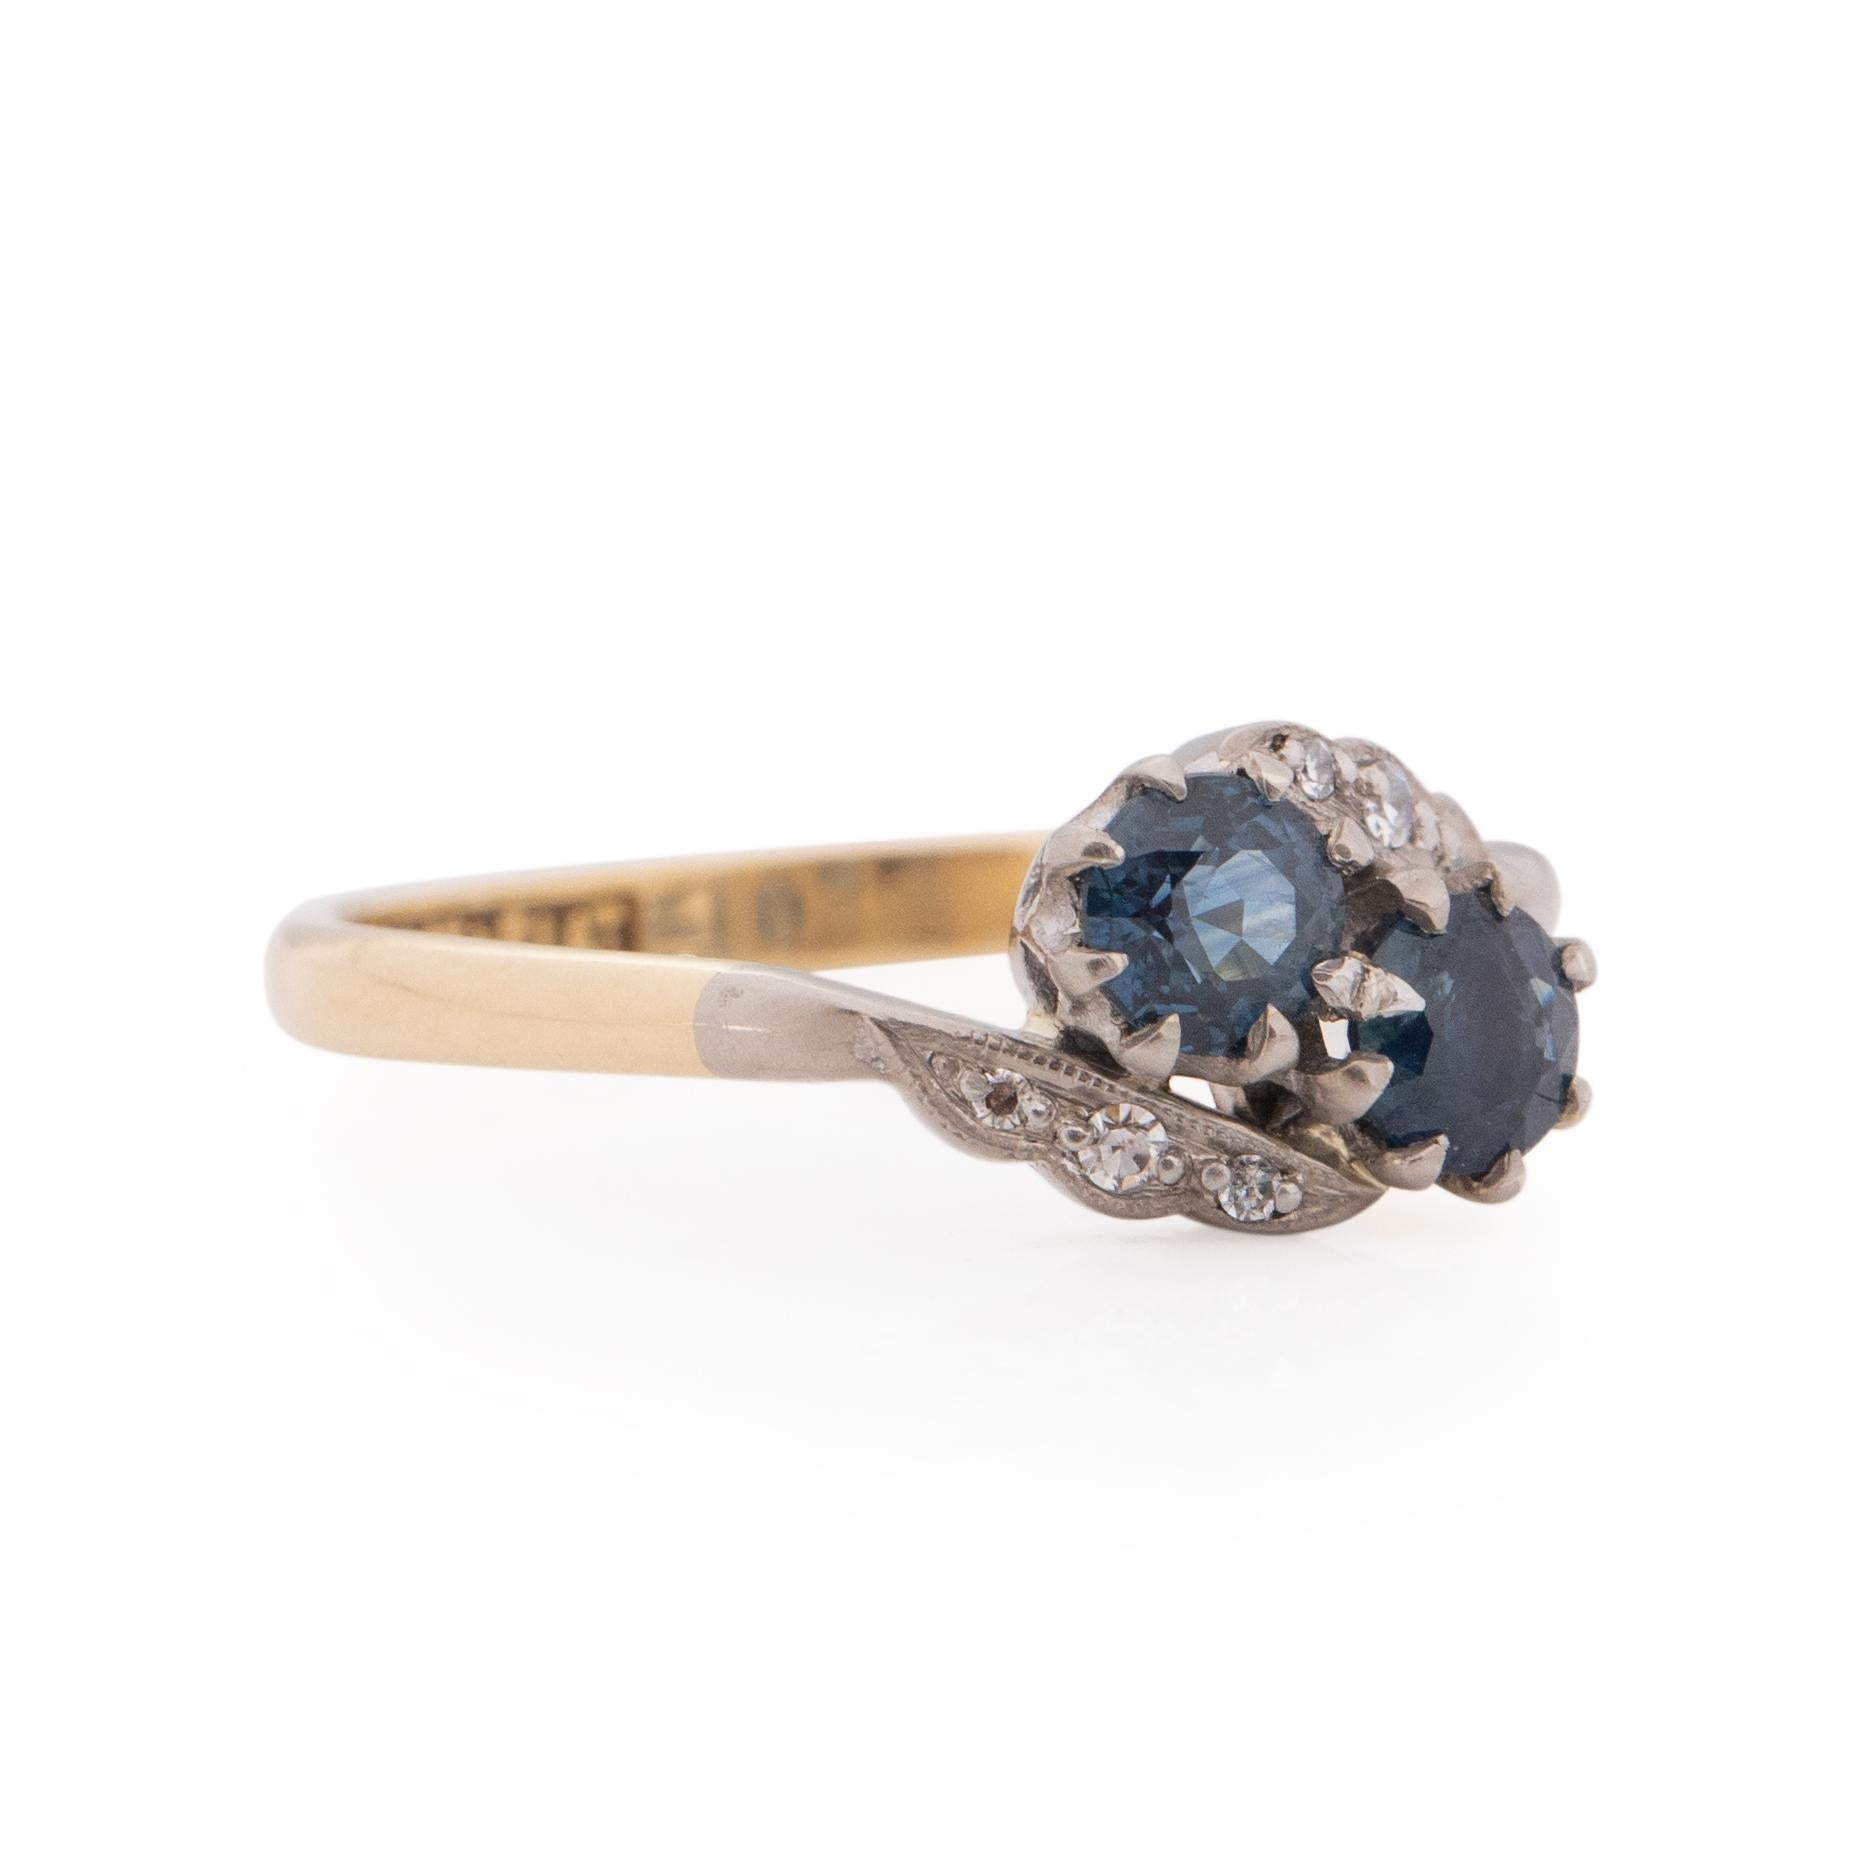 Here we have a beautiful art deco bypass style ring. In the center are two blue jean colored sapphires, the hue is not something that is come by all that often. Holding the sapphires is a classic prong setting. On either side of the center gems are